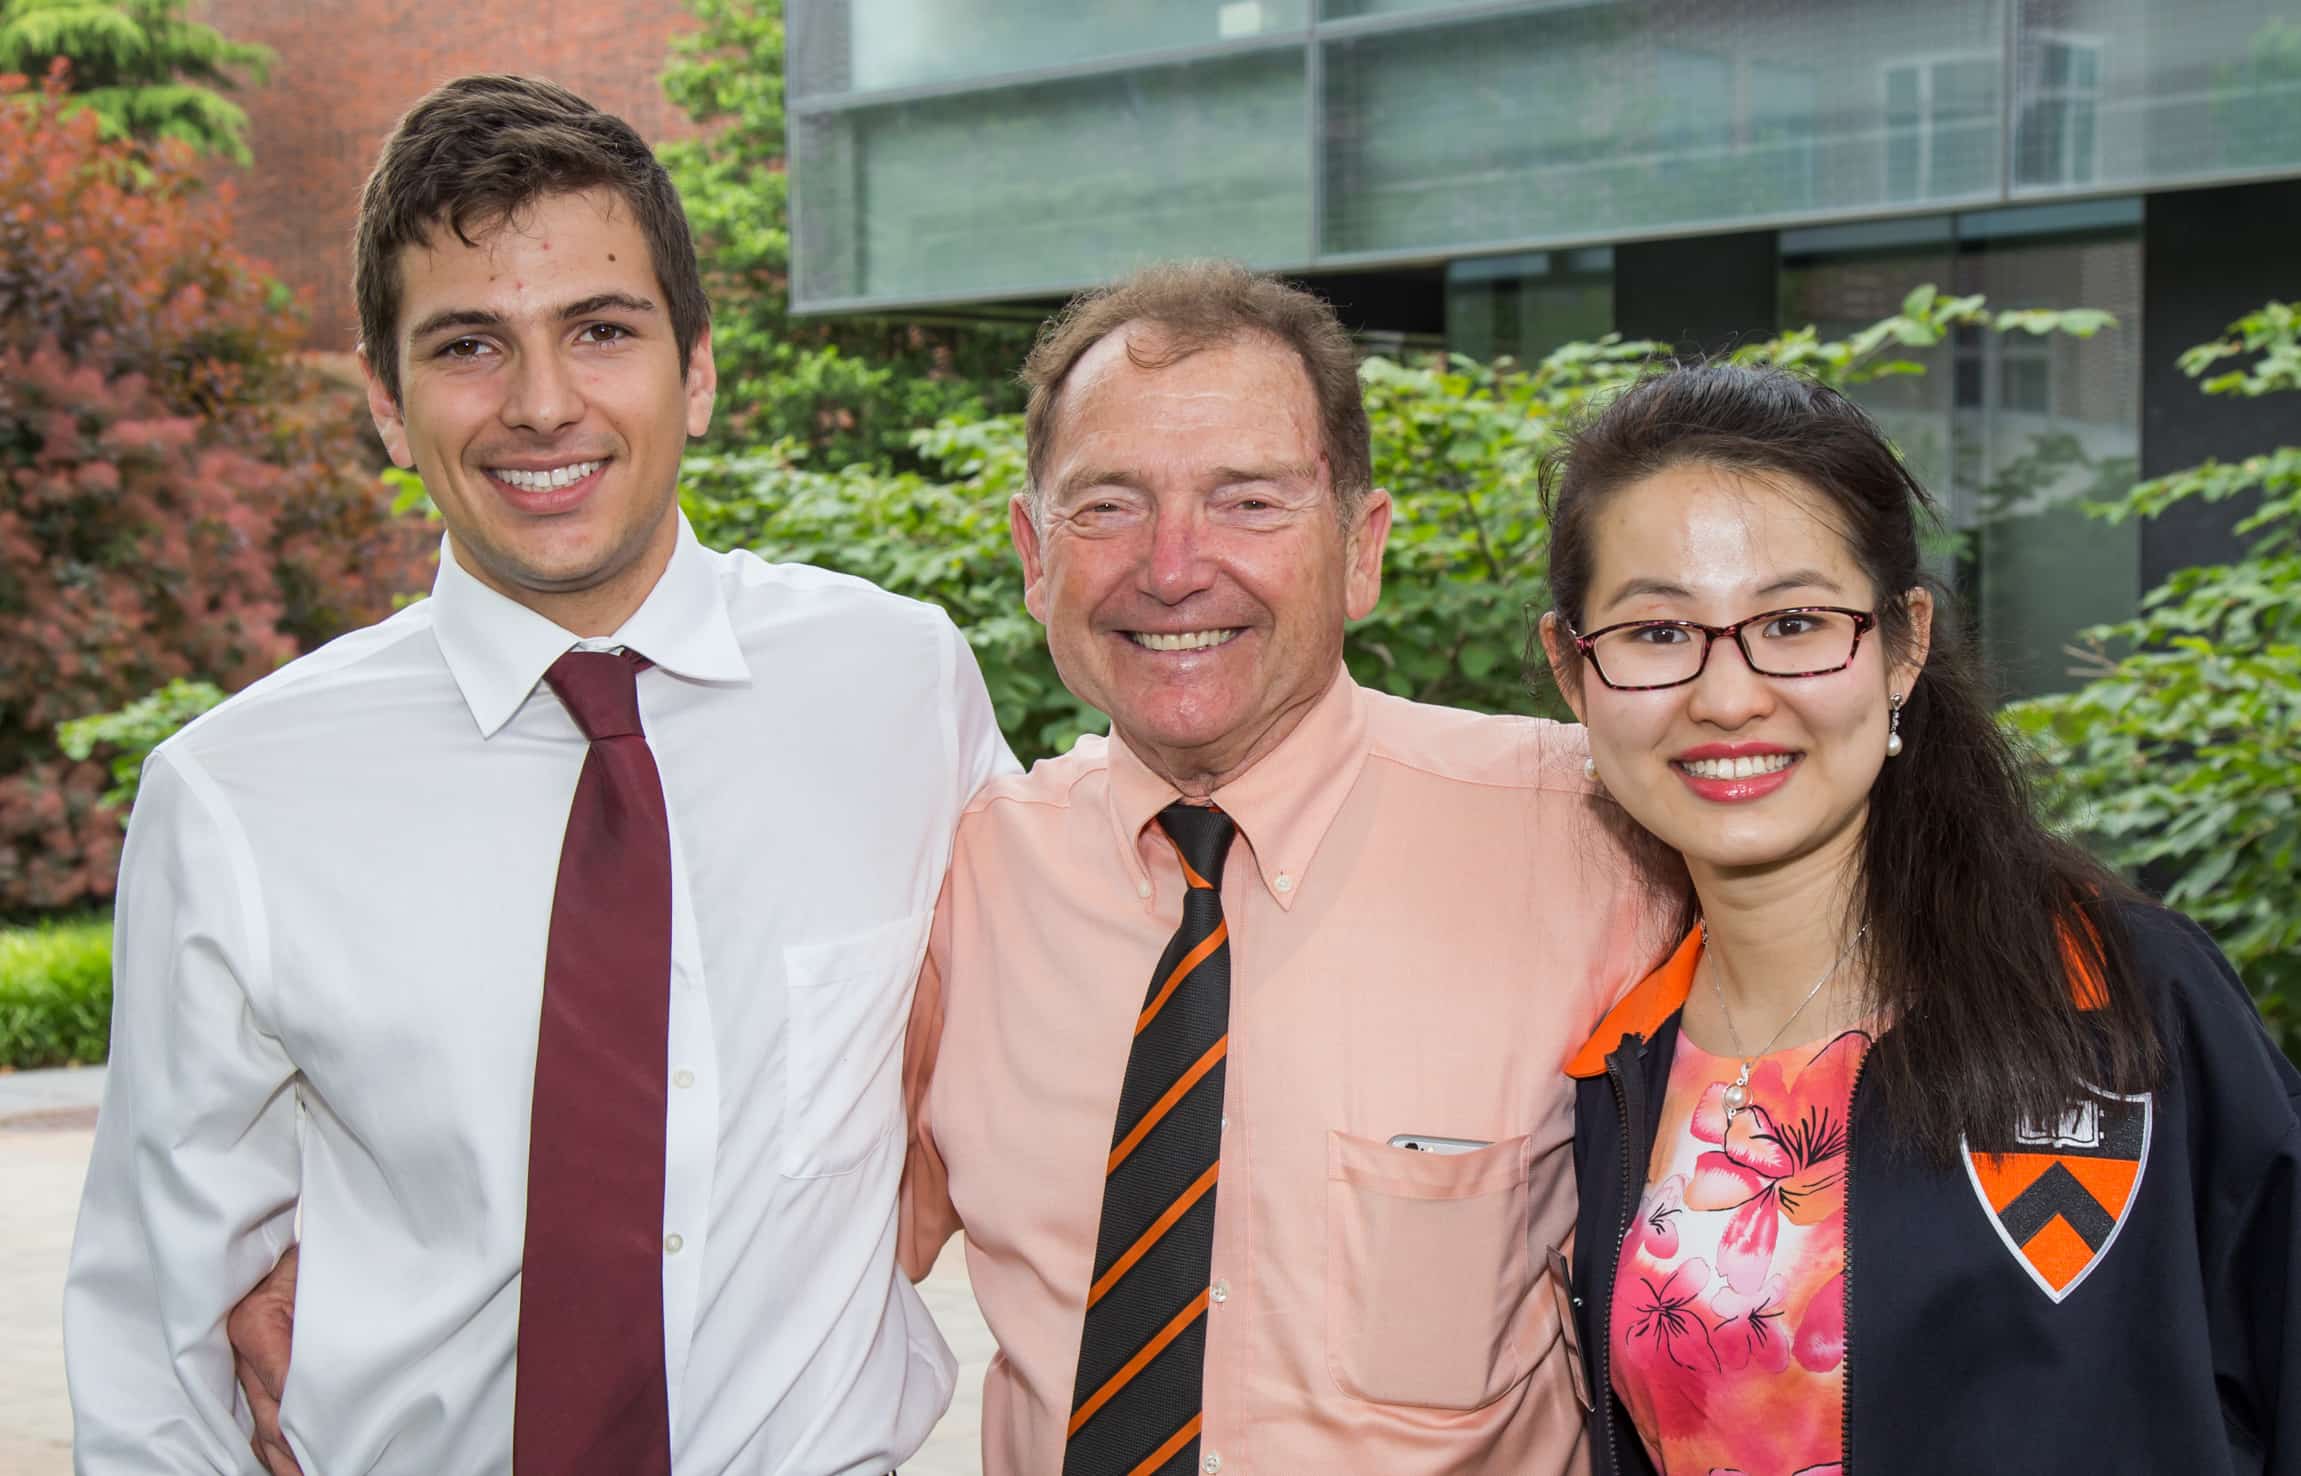 Alain Kornhauser, professor of operations research and financial engineering, congratulates Vladimir Feinberg and Lydia Liu, both of whom were among his freshman advisees four years ago. They are posing outdoors.